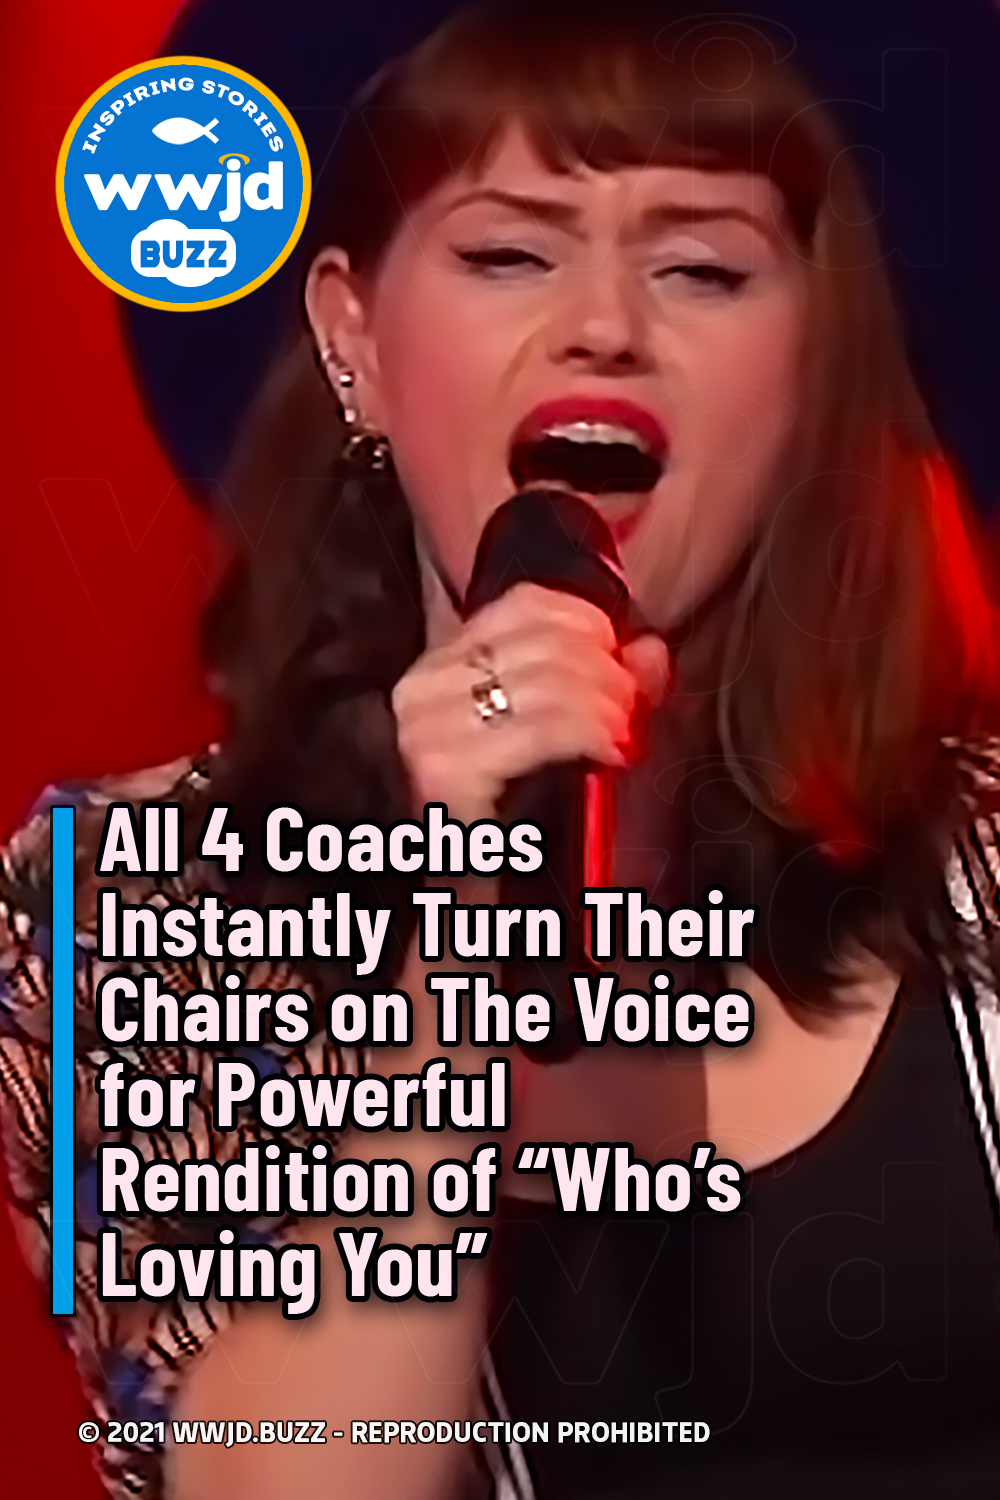 All 4 Coaches Instantly Turn Their Chairs on The Voice for Powerful Rendition of “Who’s Loving You”